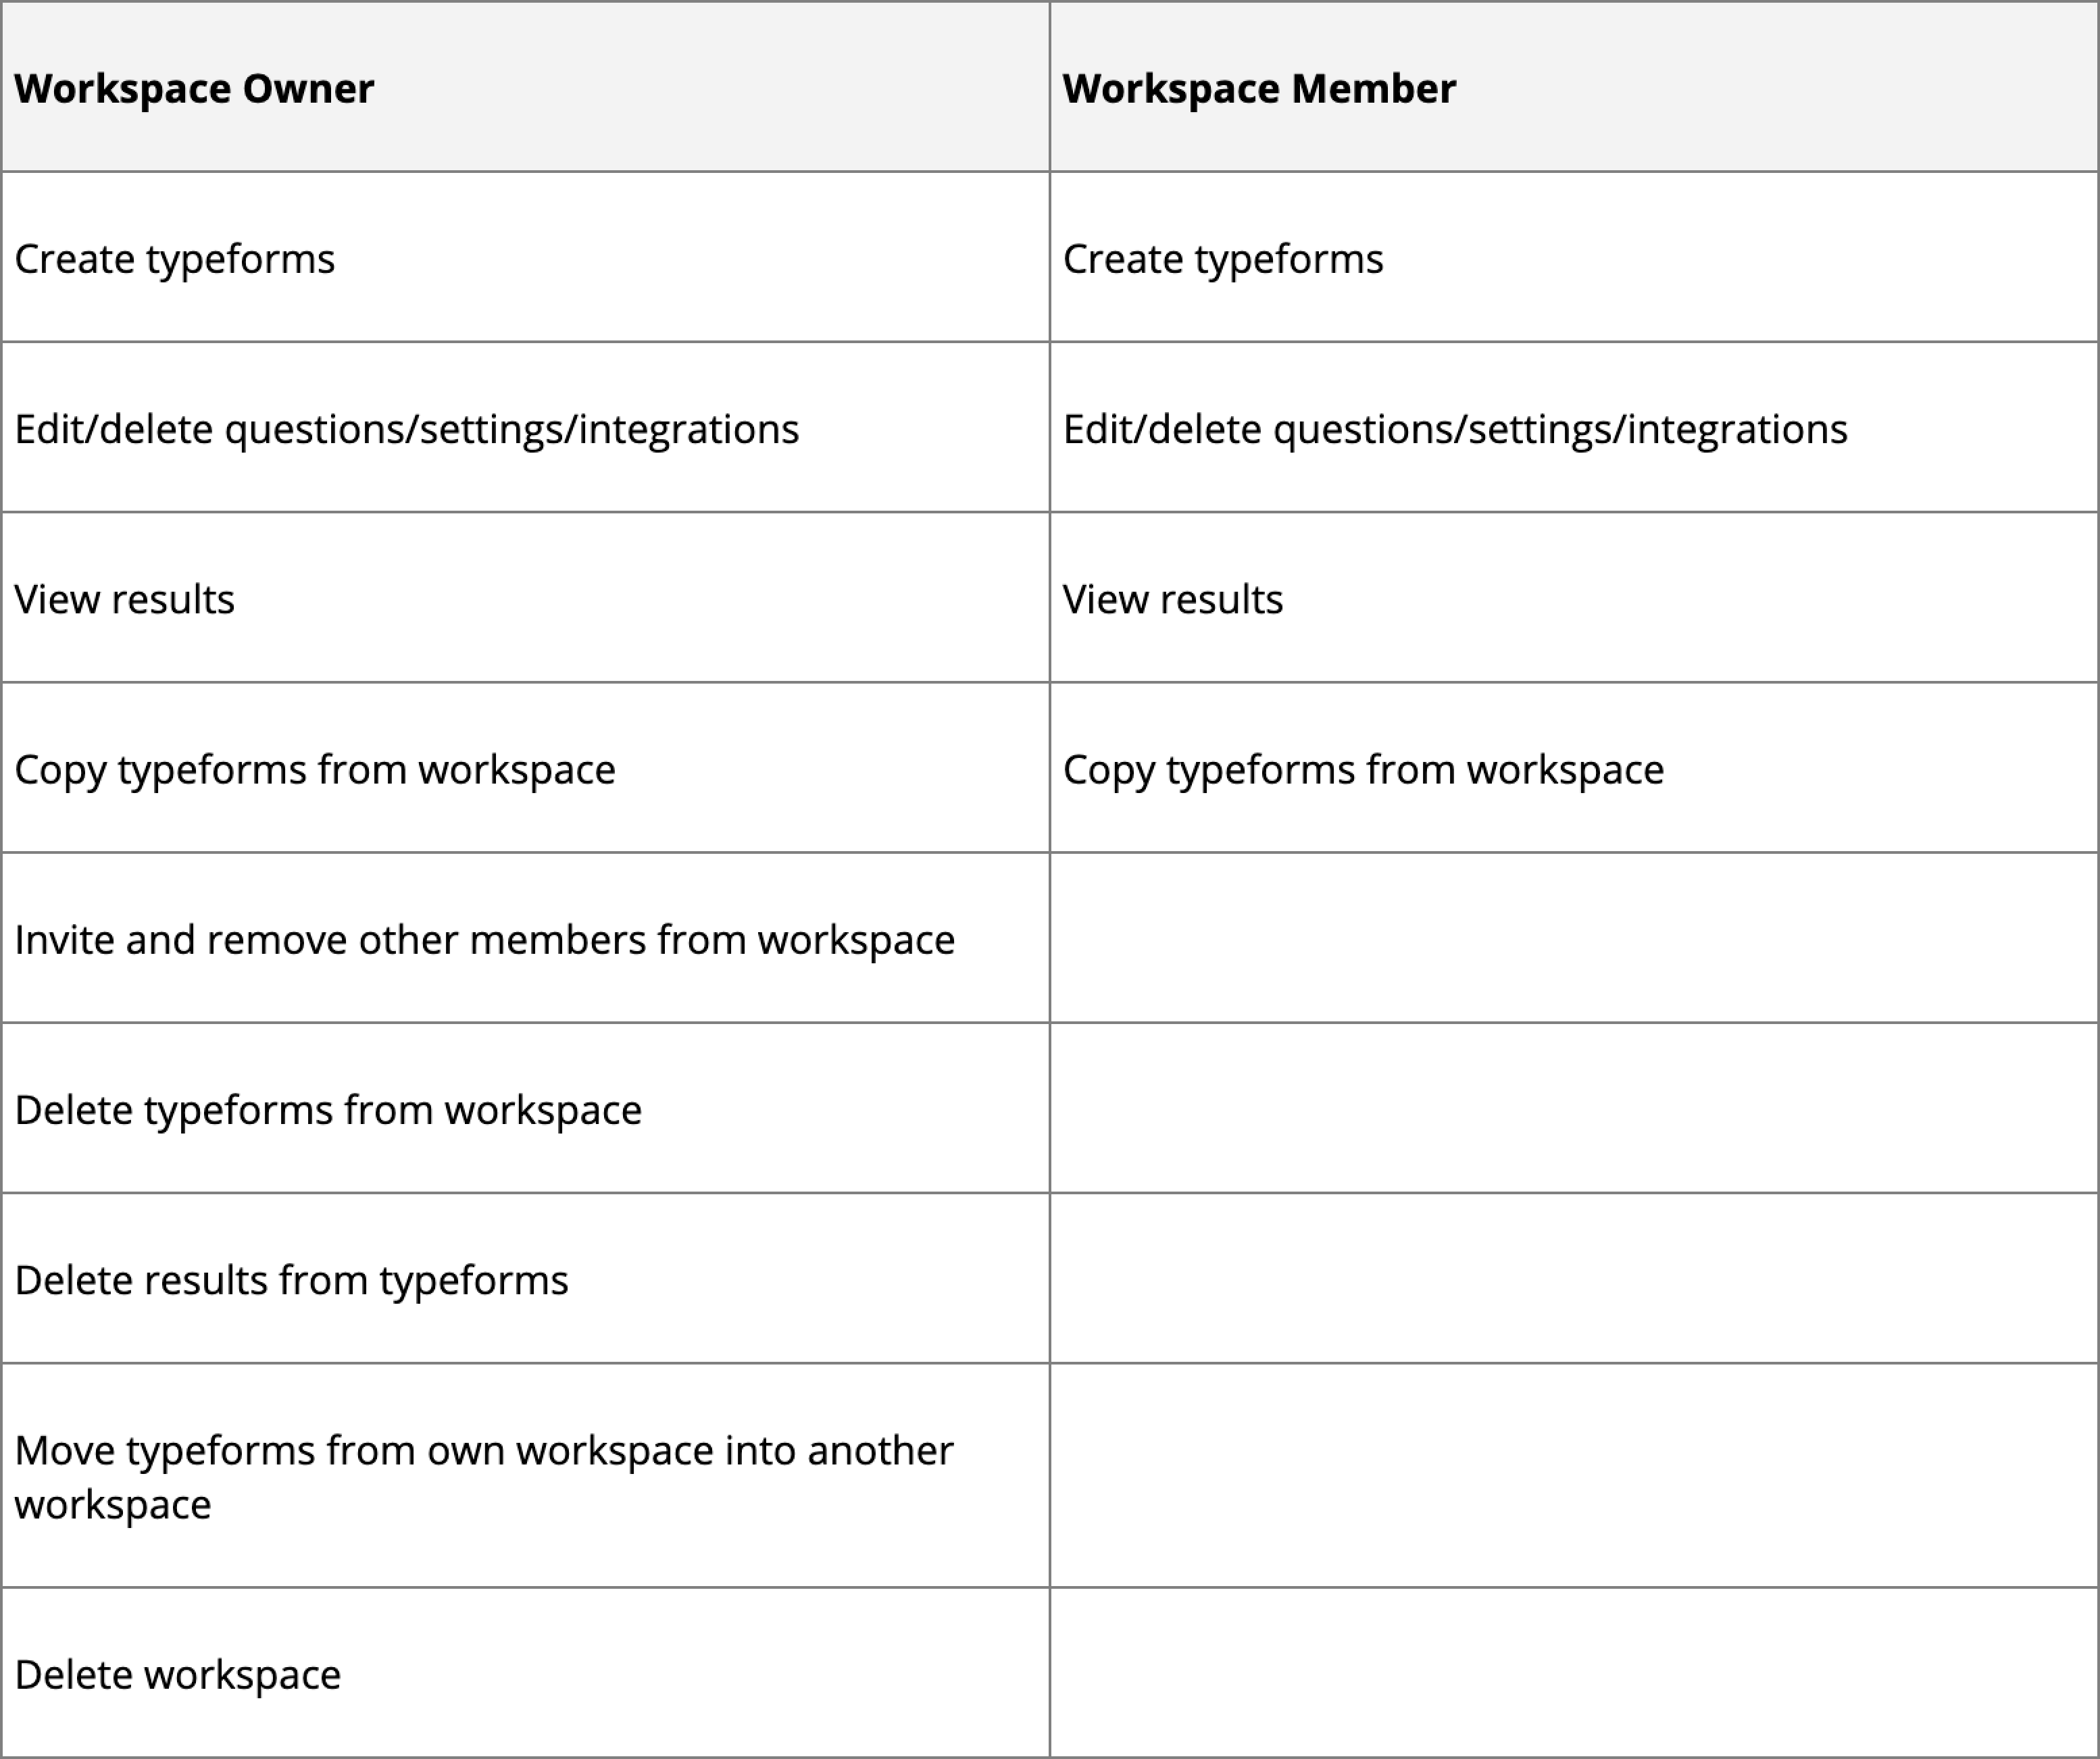 All workspace members can create typeforms; edit, setup, or delete integrations or questions; view form results; and copy typeforms from the workspace. Workspace owners can additionally invite and remove other members from the workspace, delete typeforms from the workspace, delete typeform results, move typeforms between workspaces, and delete workspaces.